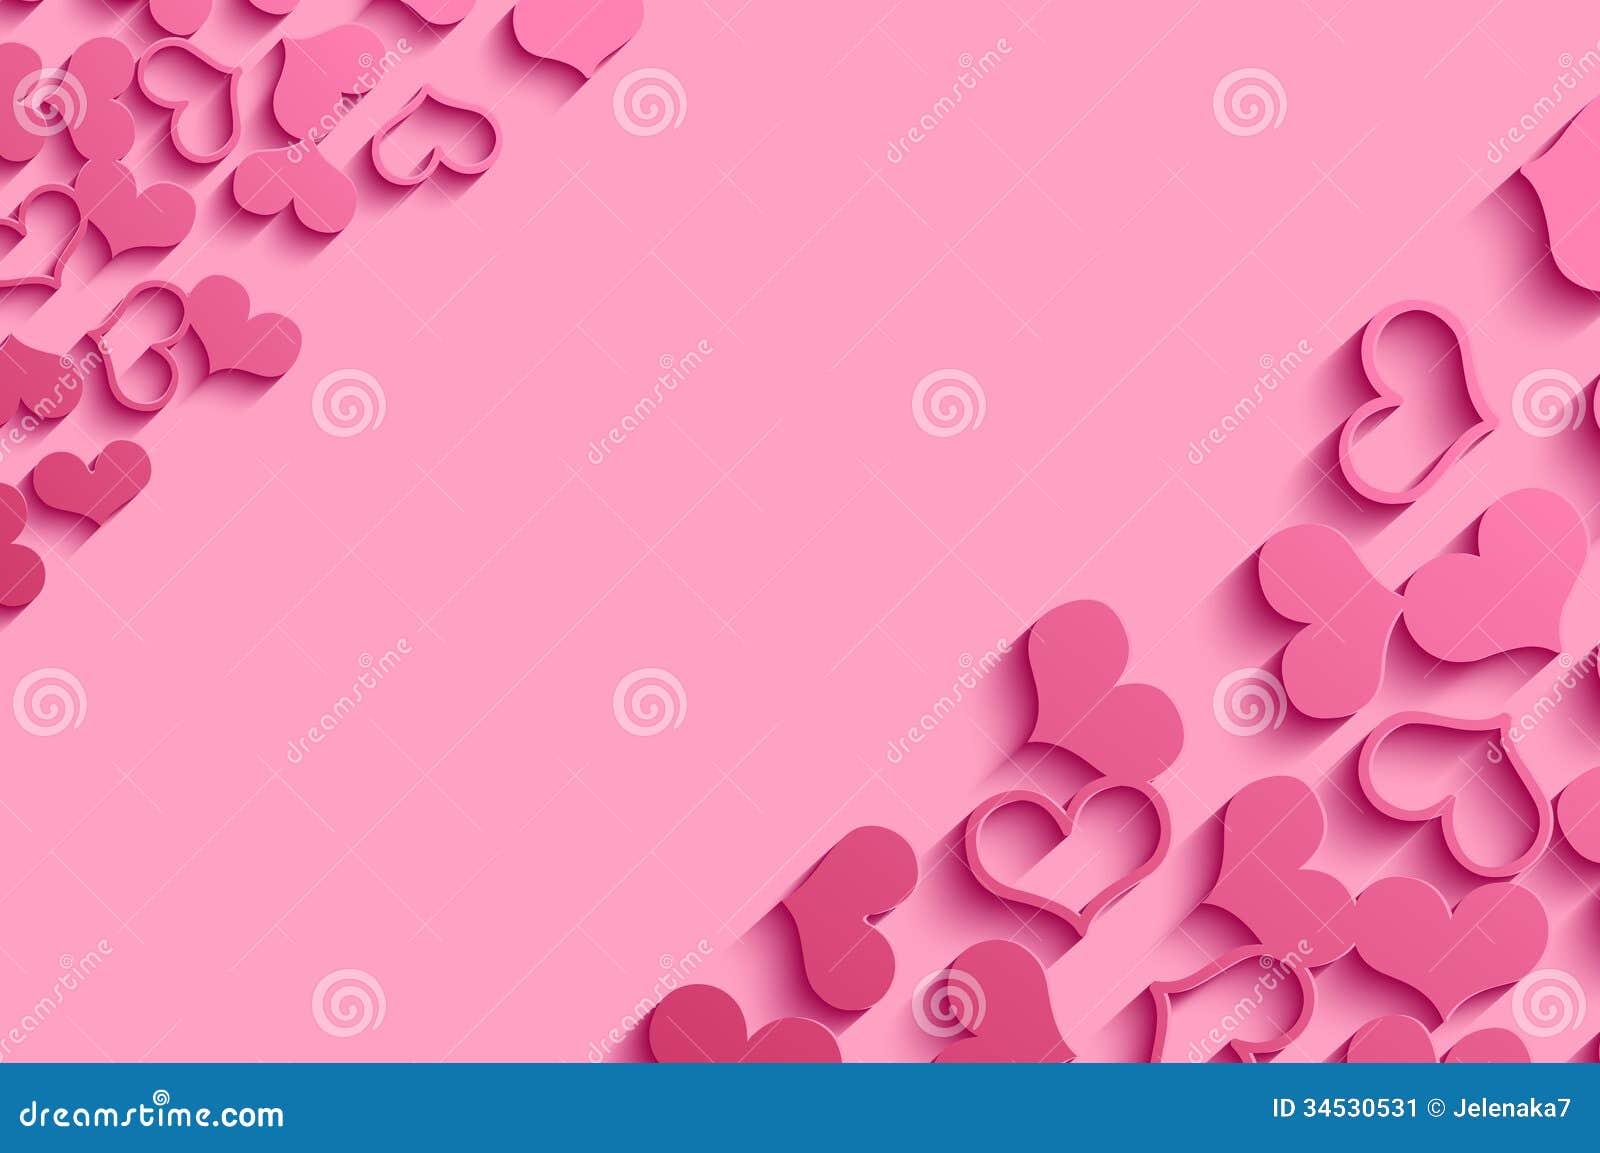 Animated Happy Valentines Day Wallpaper